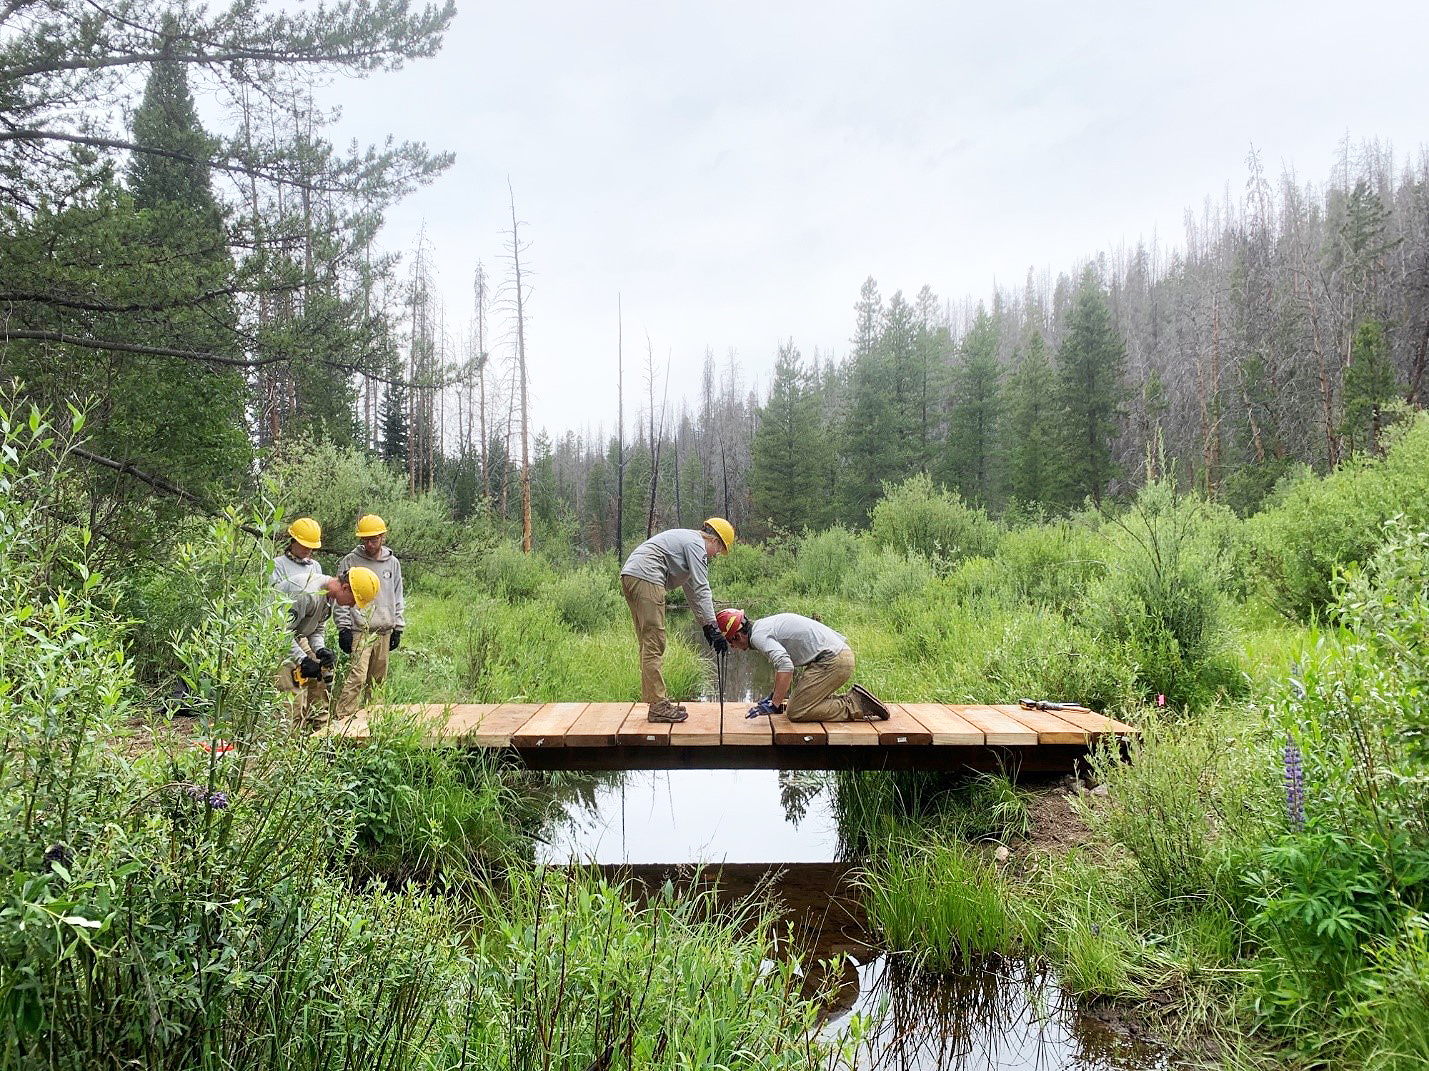 A group of people working on a wooden bridge in a wooded area.